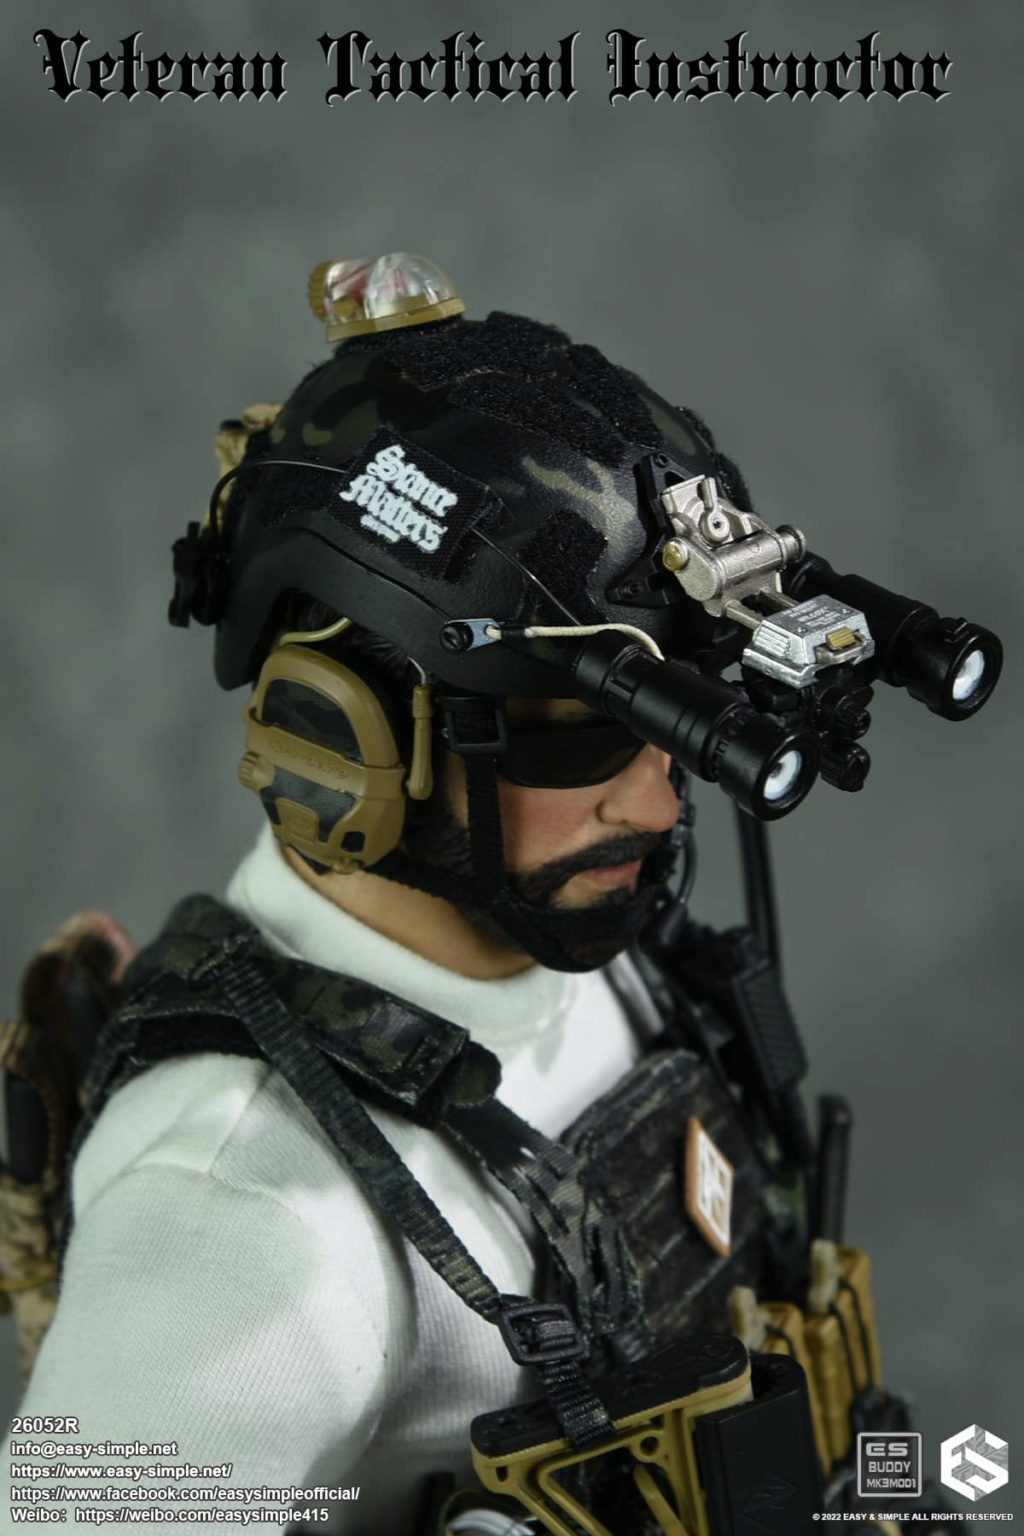 NEW PRODUCT: Easy&Simple: 26052R 1/6 Scale Veteran Tactical Instructor 31159510